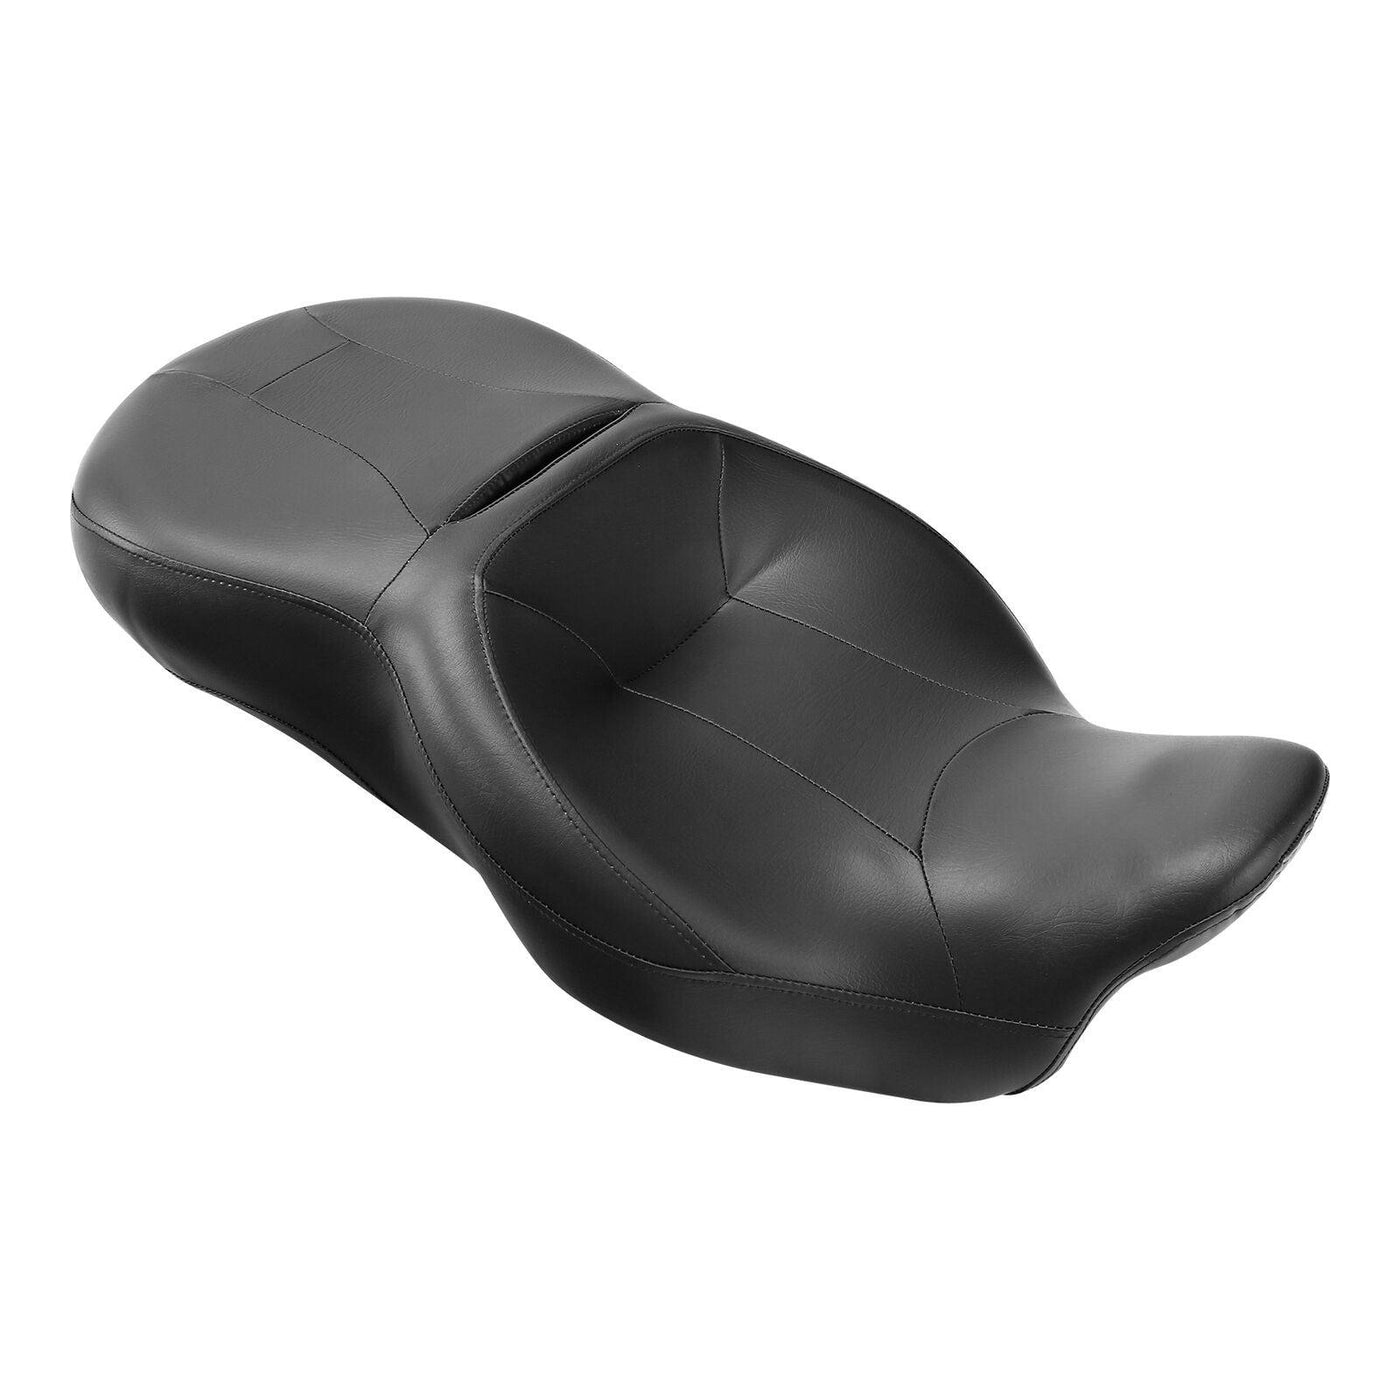 Rider Passenger Seat Fit For Harley Touring FLHT FLHX FLHR FLTRX 2009-2022 Black - Moto Life Products